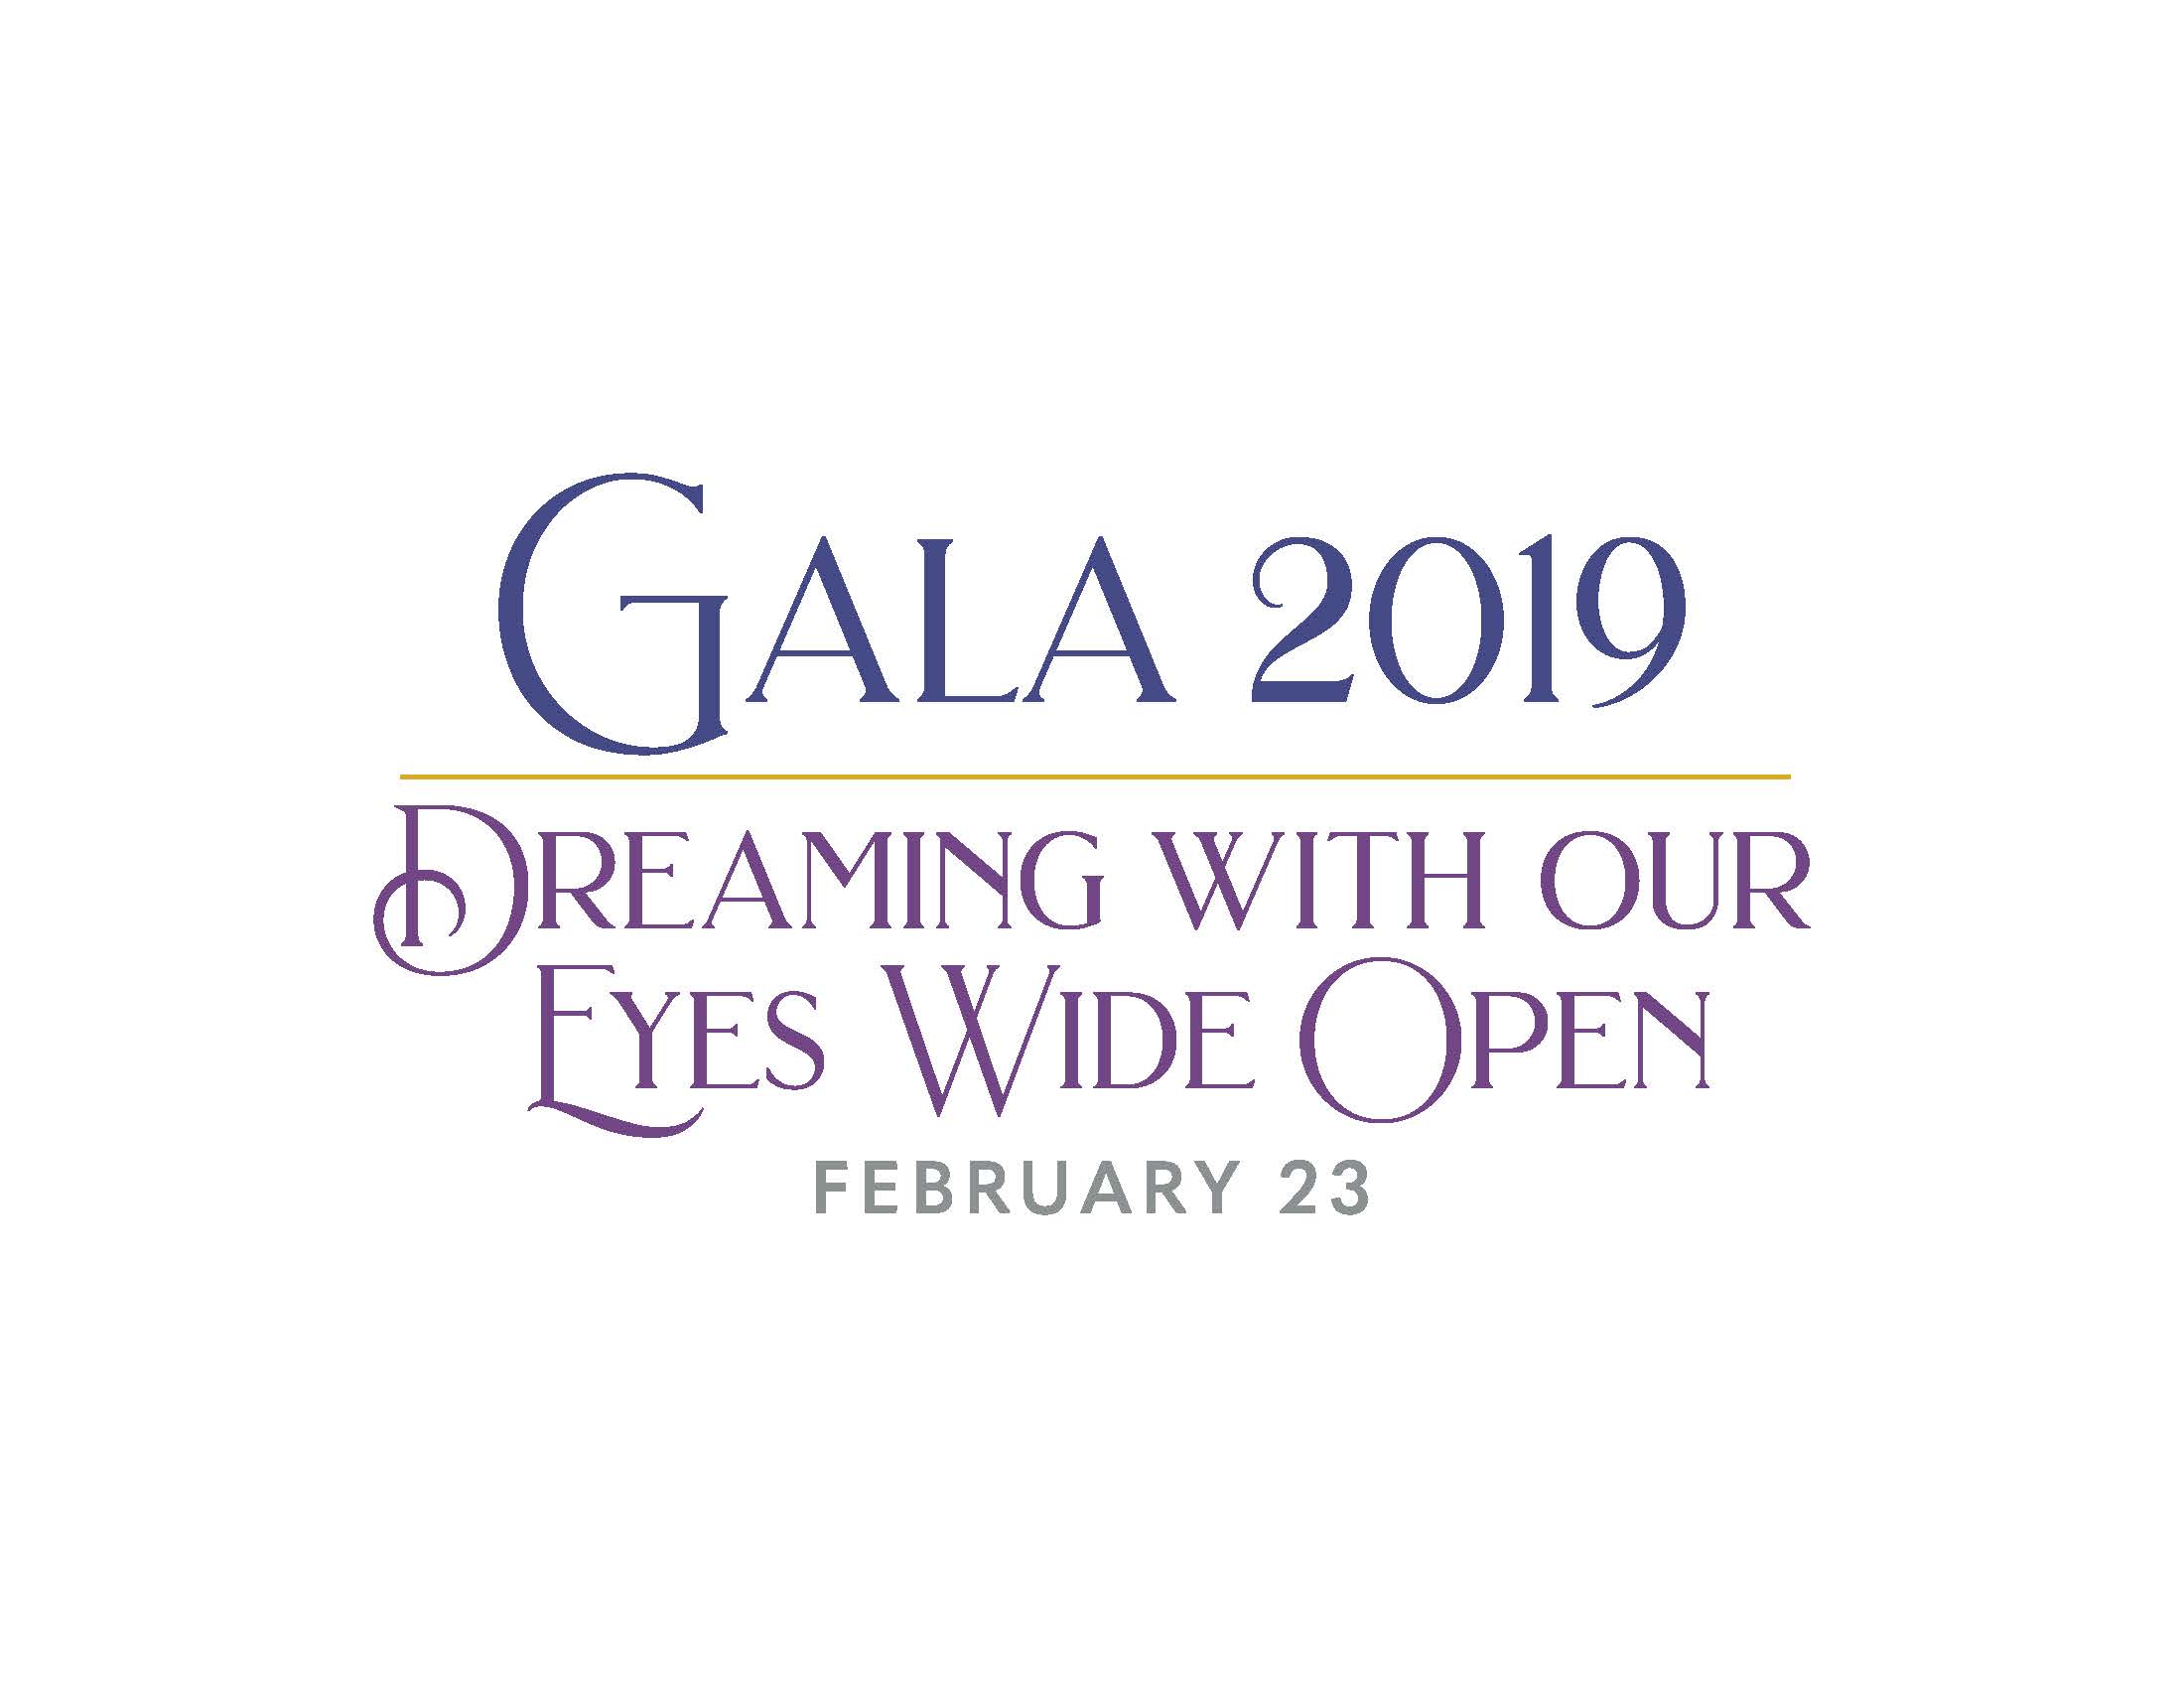 Thank you for your support of Gala 2019!